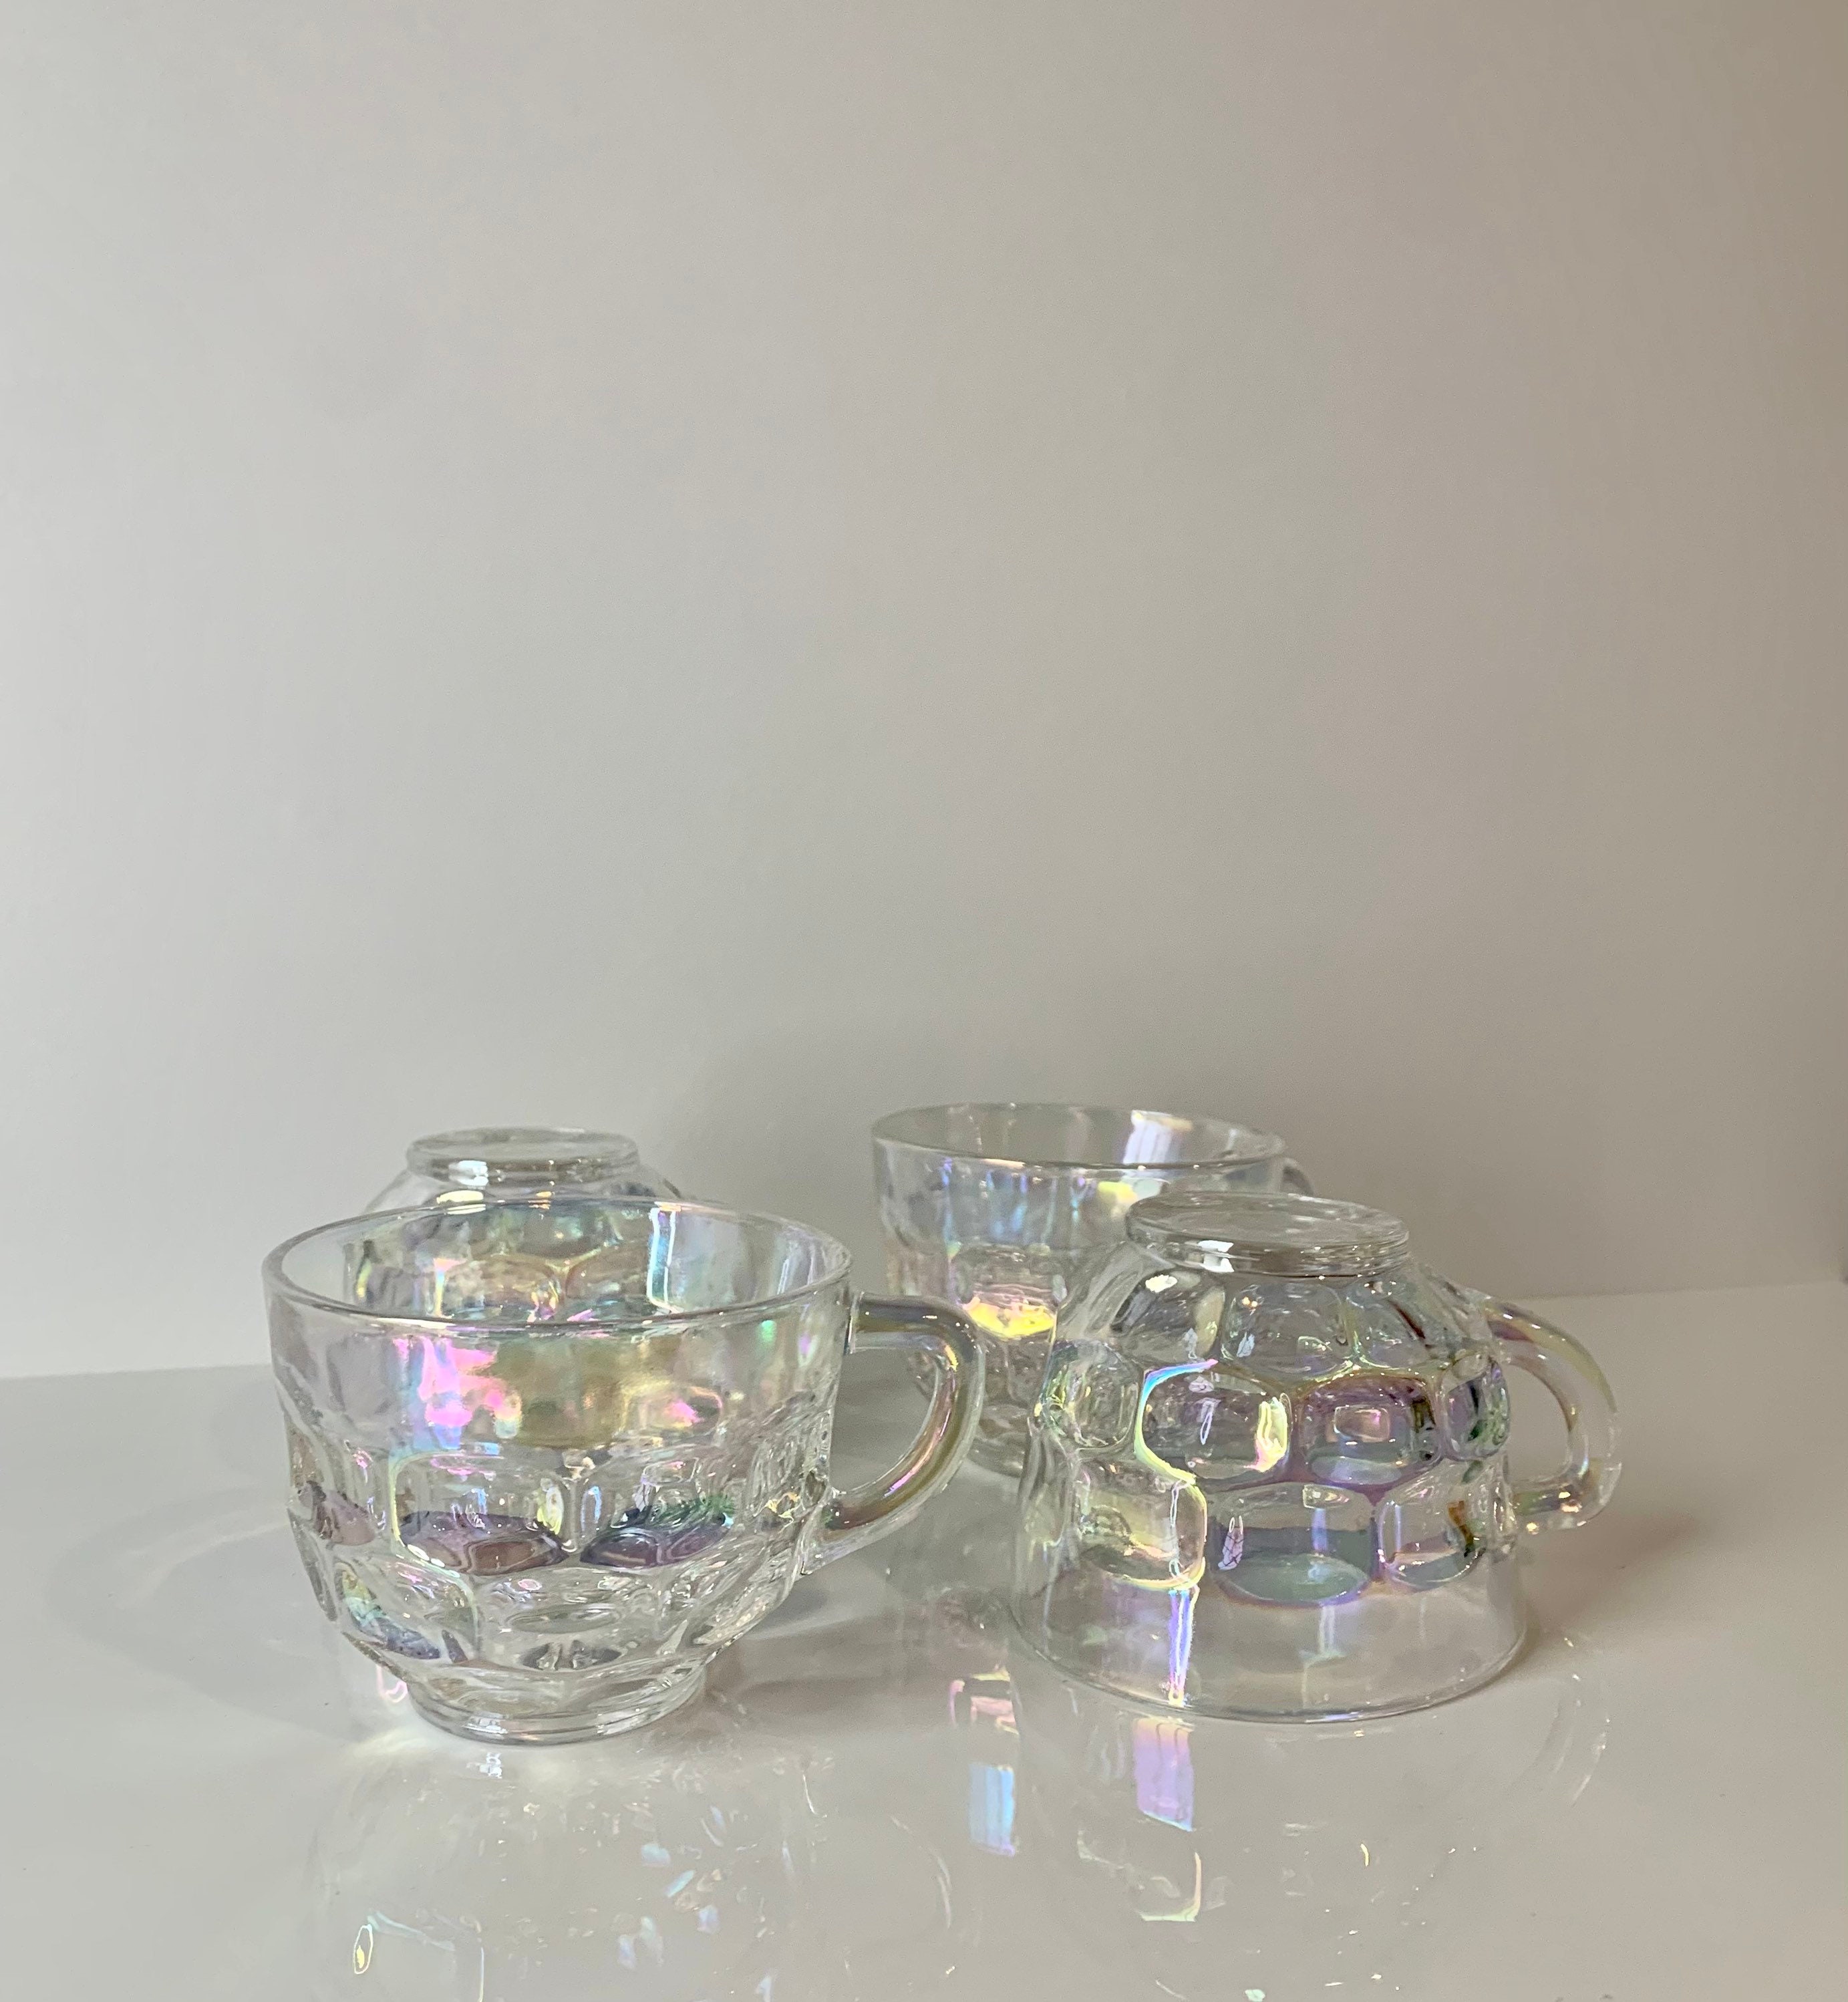 Vintage Federal Glass Company Yorktown Iridescent Snack Set Of 4 Teacups And 4 Biscuit Trays